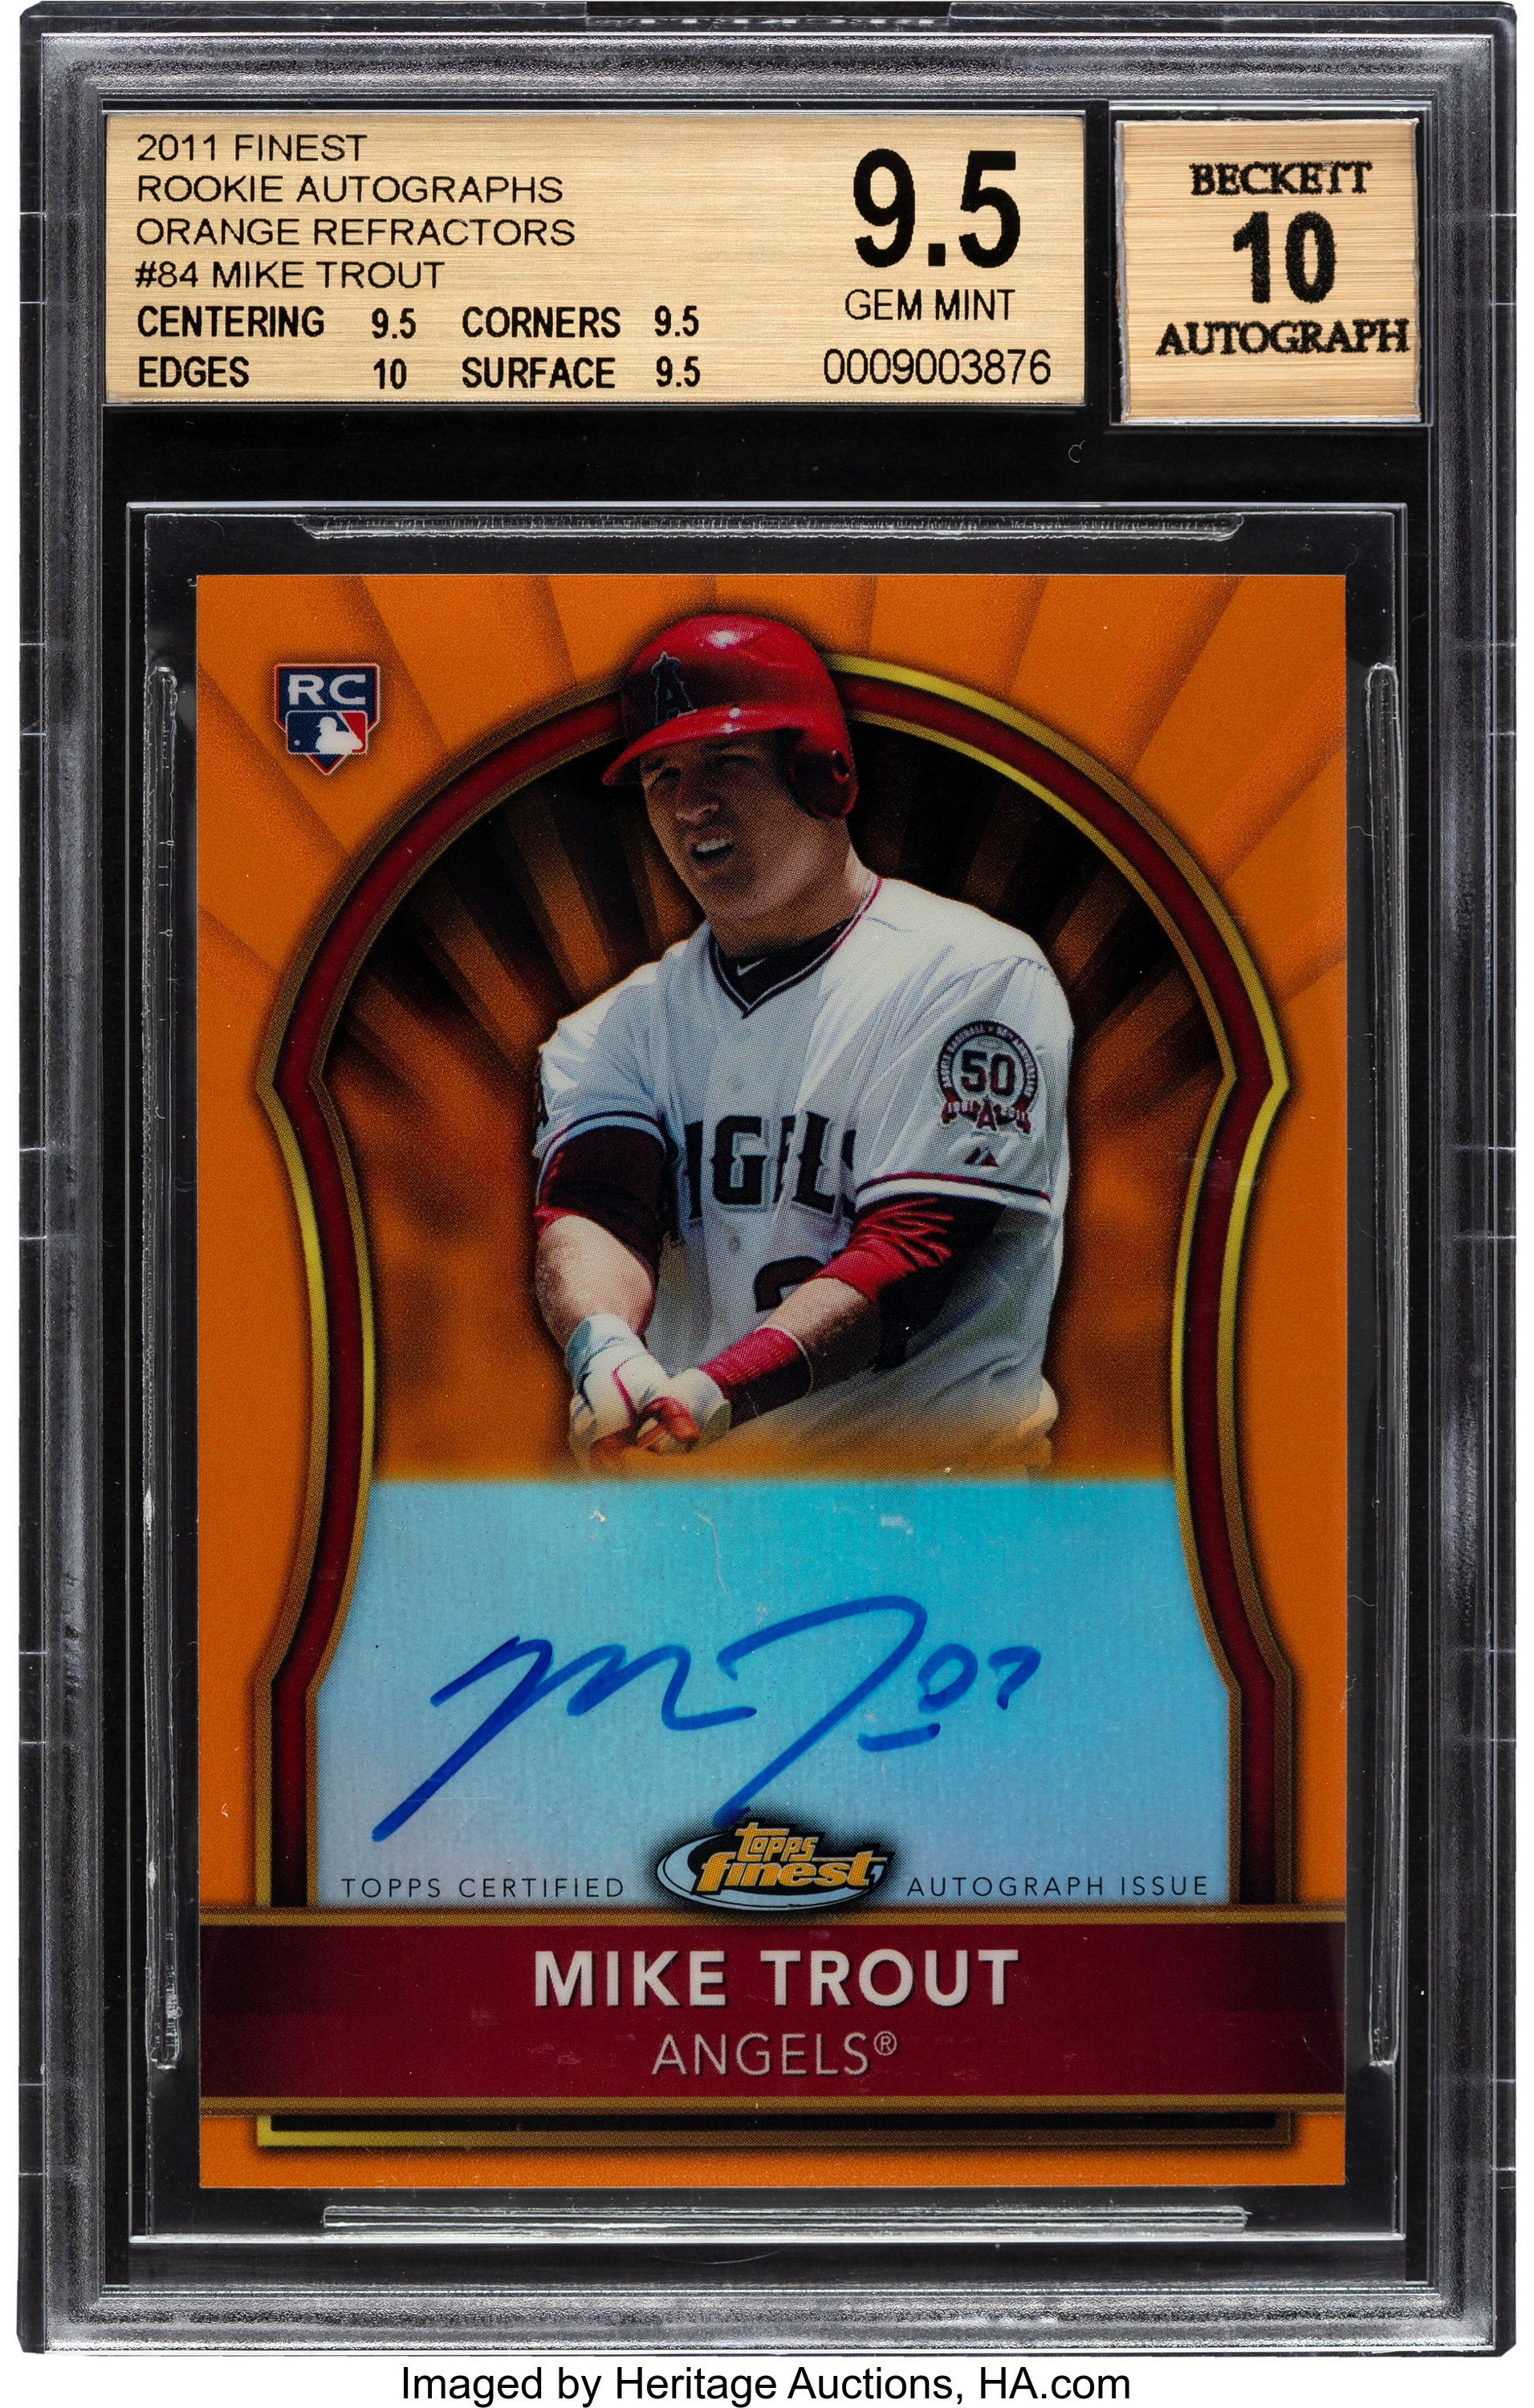 2011 Topps Finest Mike Trout Orange Refractor Rookie Autograph 4 